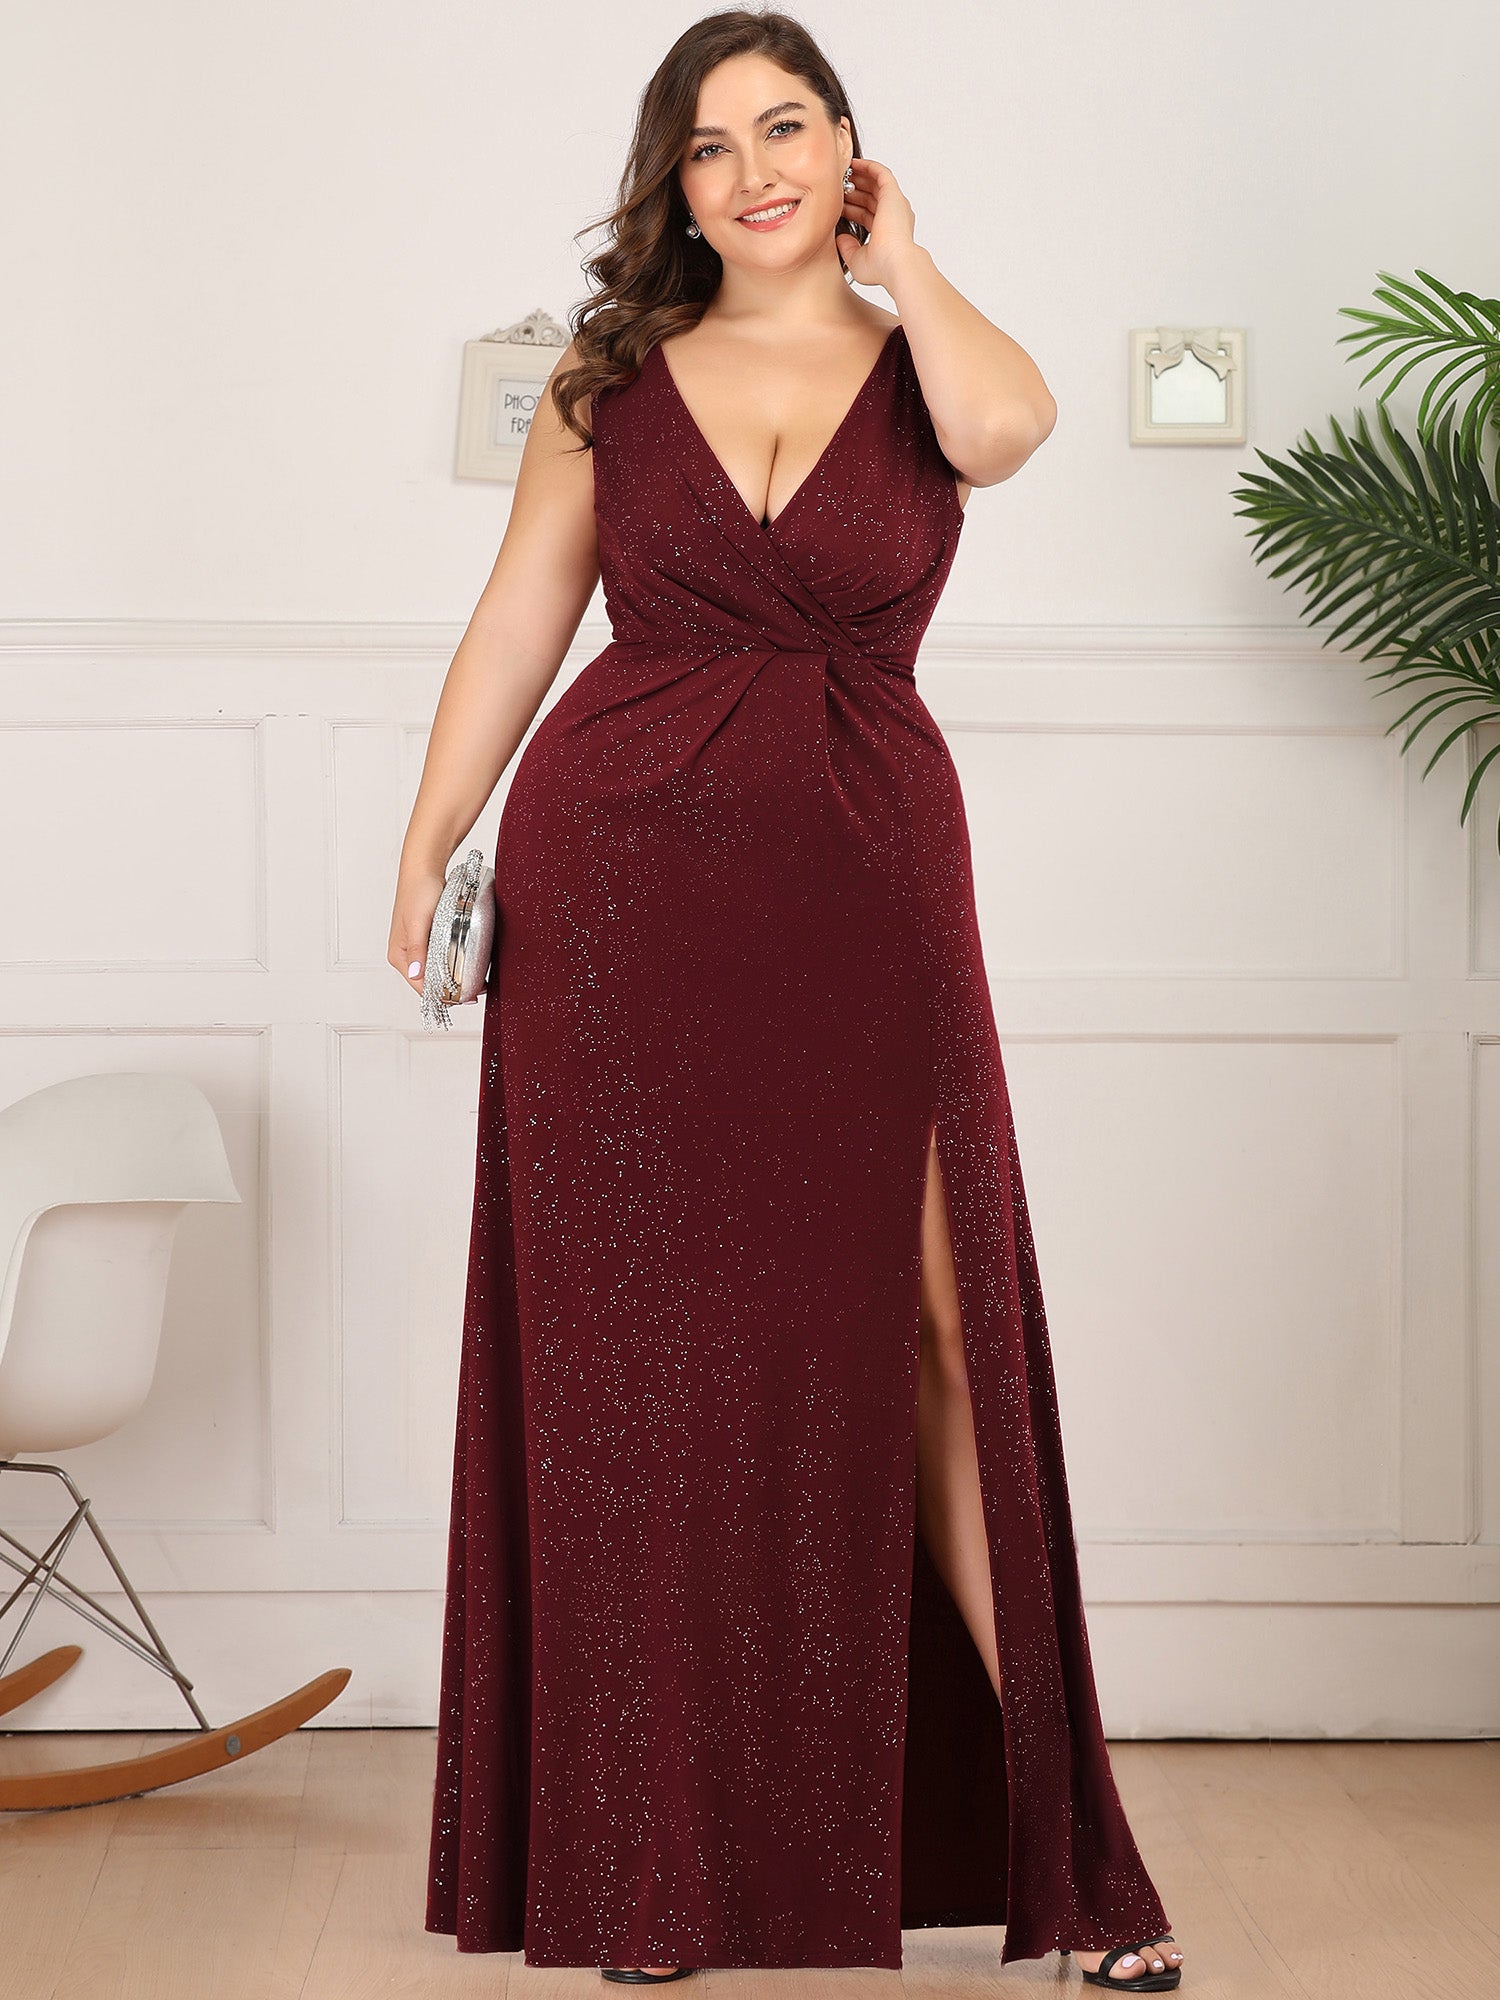 What Dresses Look Best for Curve Girls on Ever Pretty?